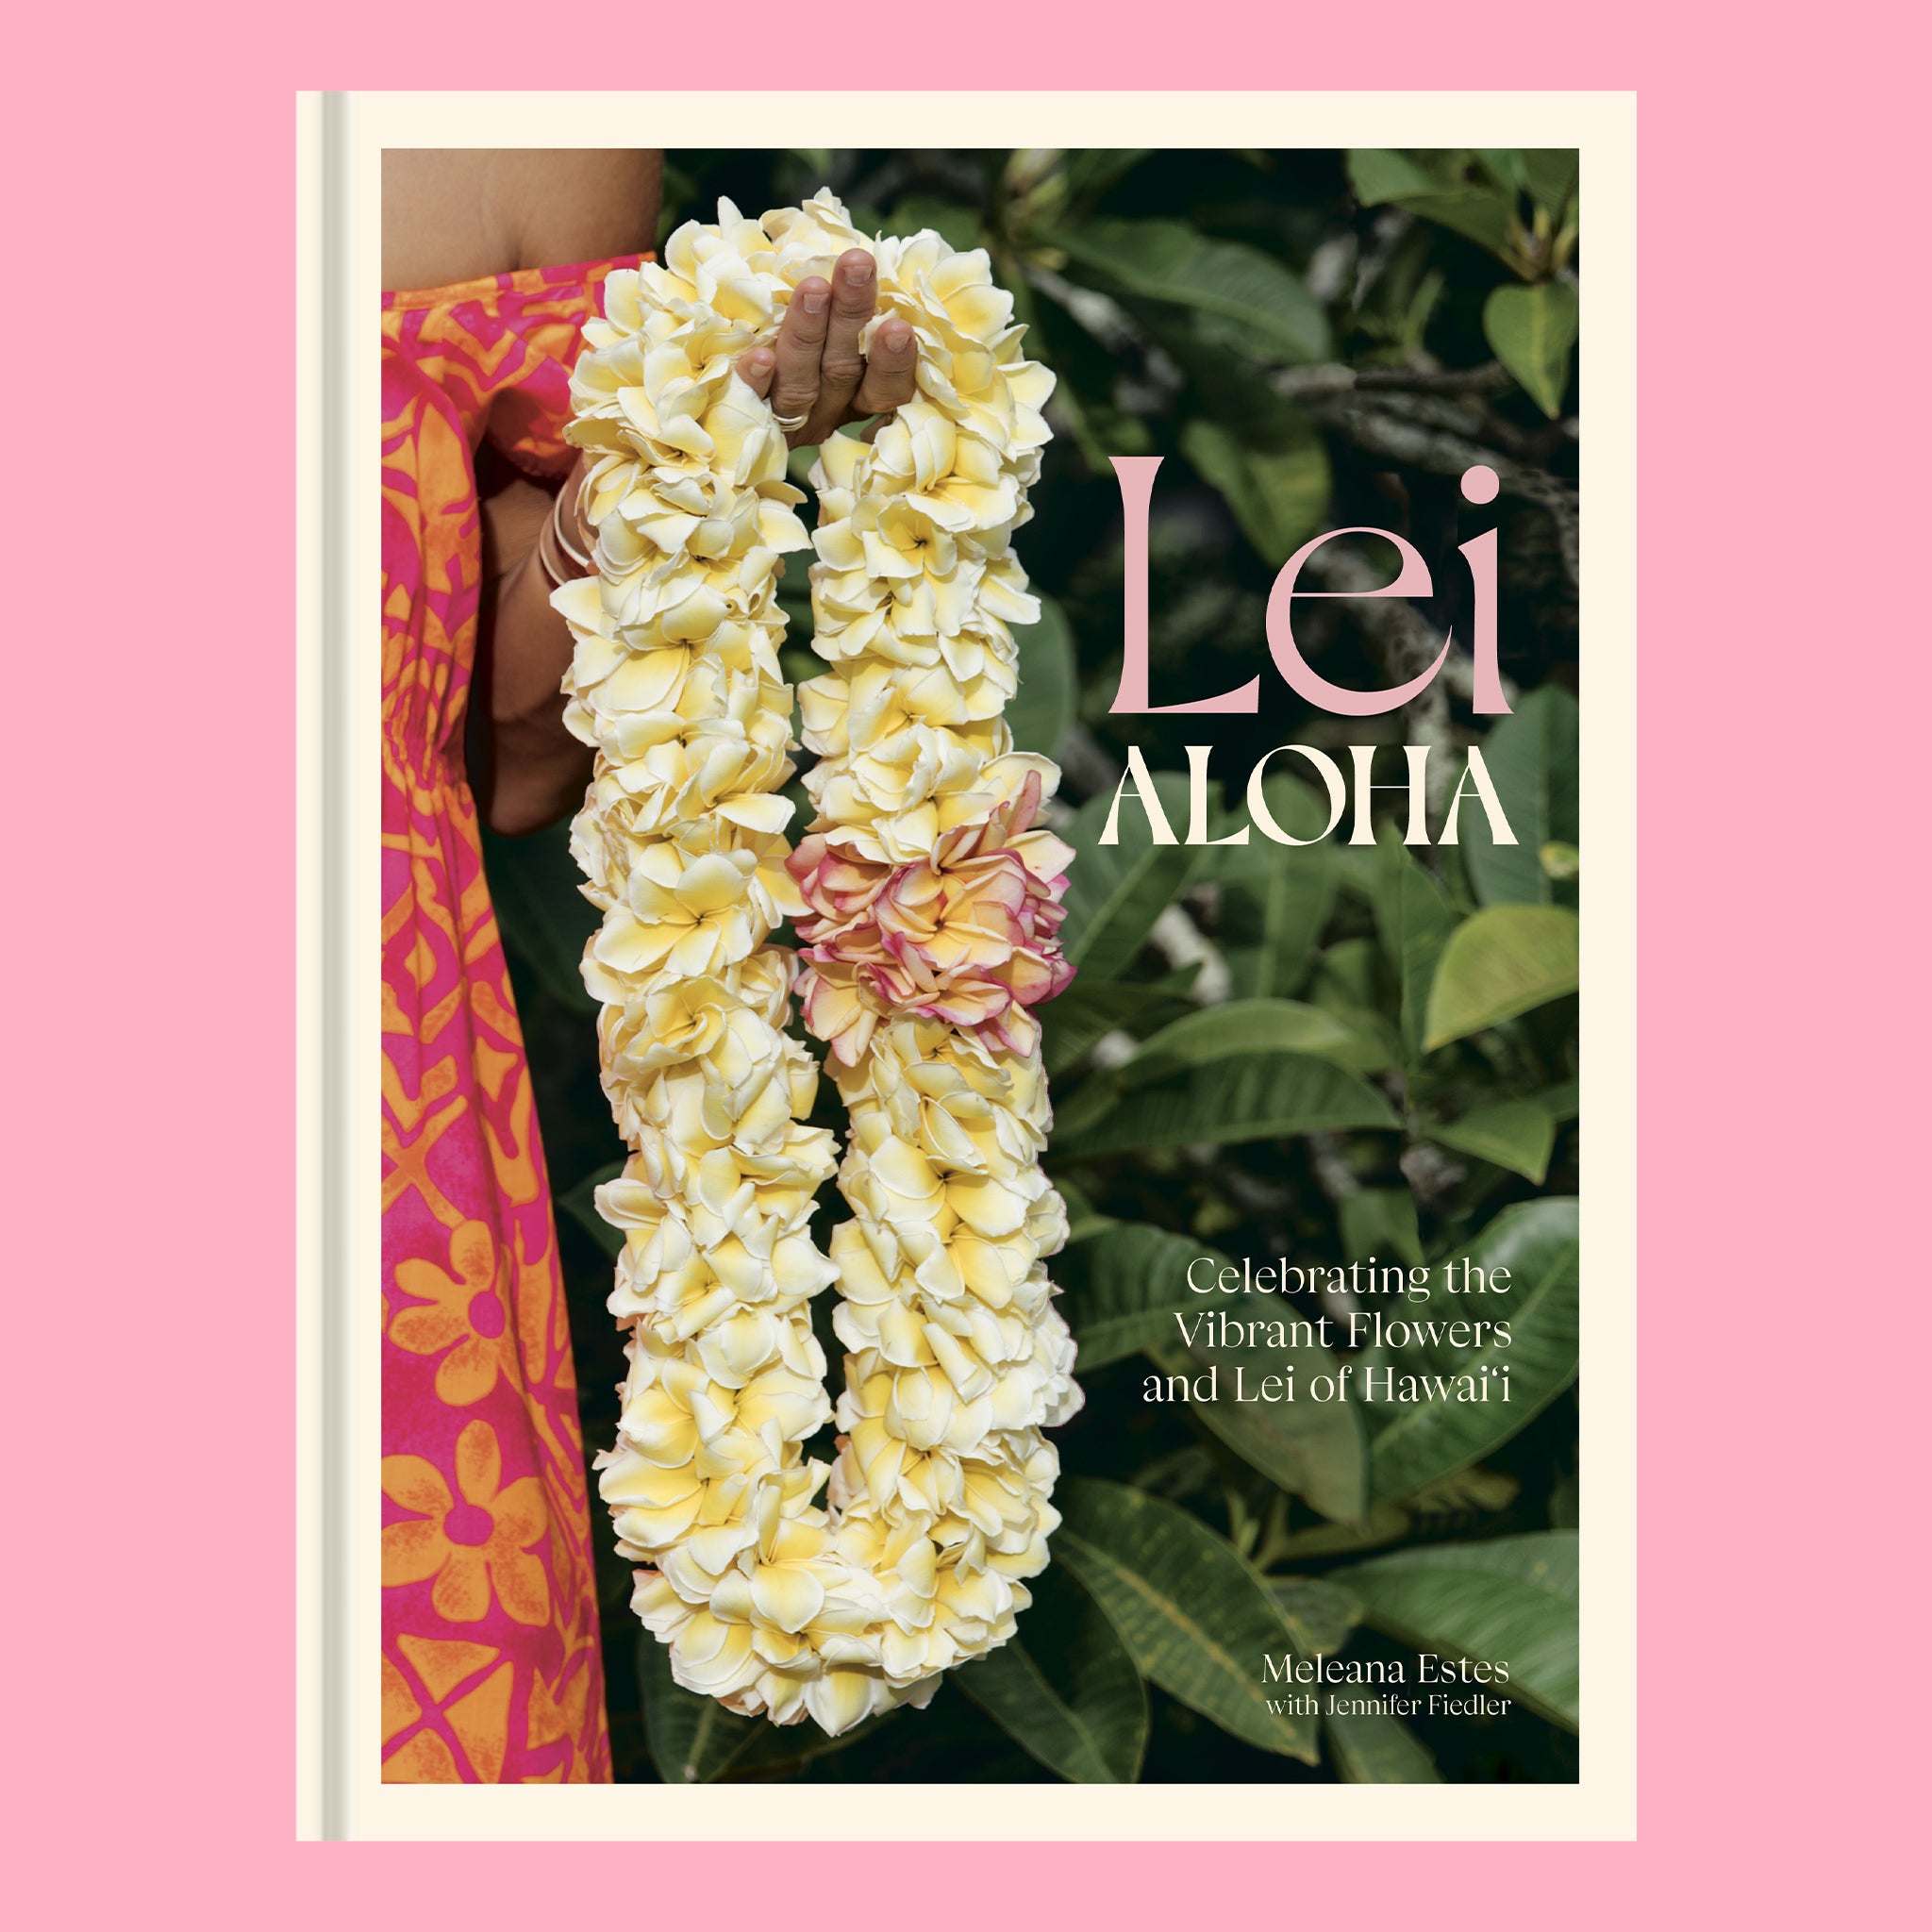 On a pink background is a book cover with green foliage and a model holding a lei along with the title of the book that reads, &quot;Lei Aloha Celebrating the Vibrant Flowers and Lei of Hawai&#39;i&quot;. 